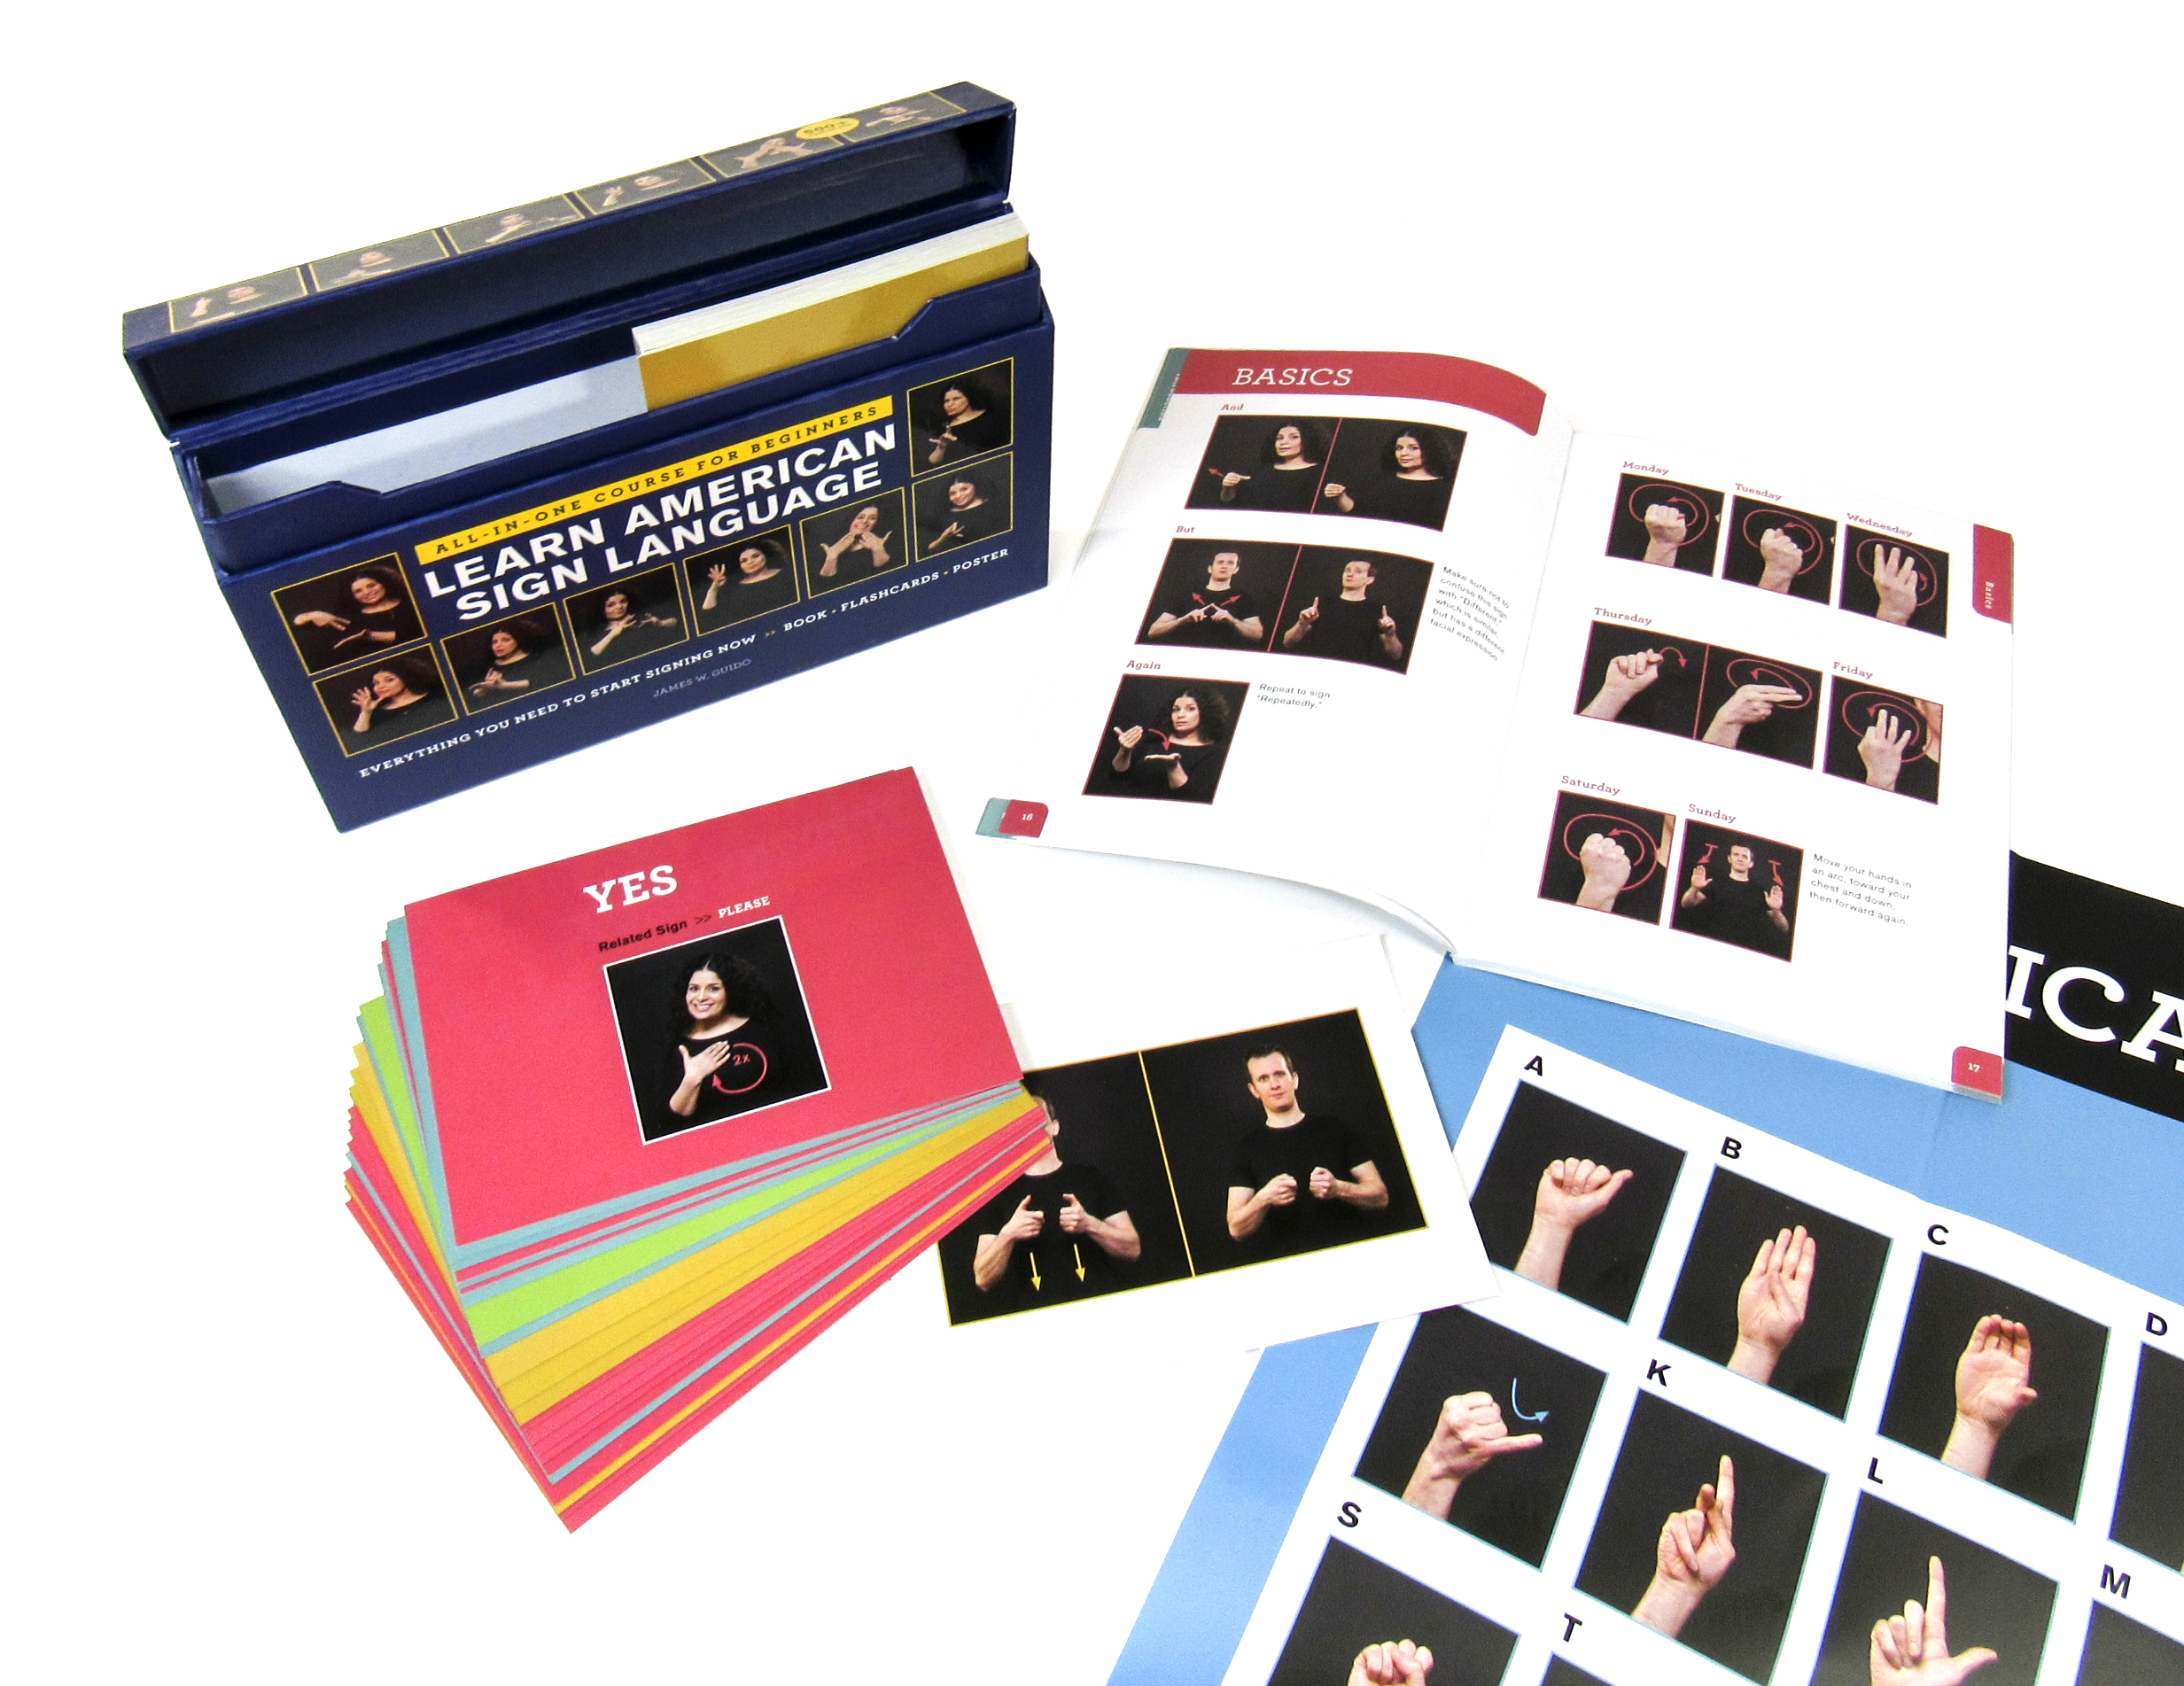 The Learn American Sign Sign Language Course includes a book, 50 flashcards and a poster.